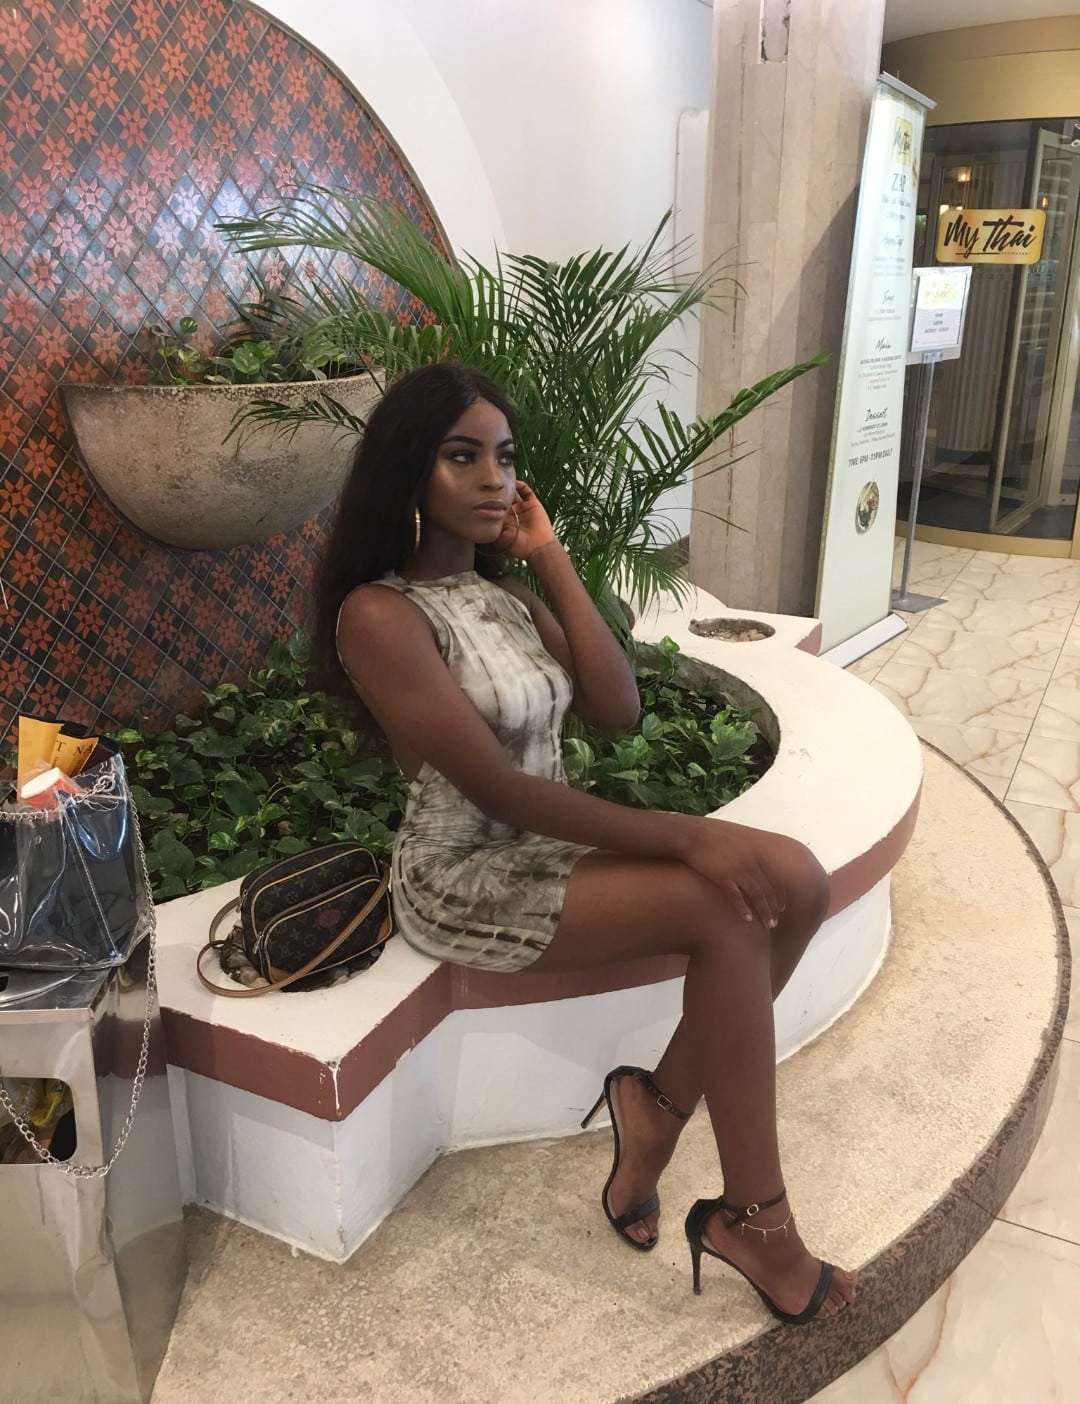 Nigerian lady shares emotional video as she celebrates one year of quitting smoking and doing drugs